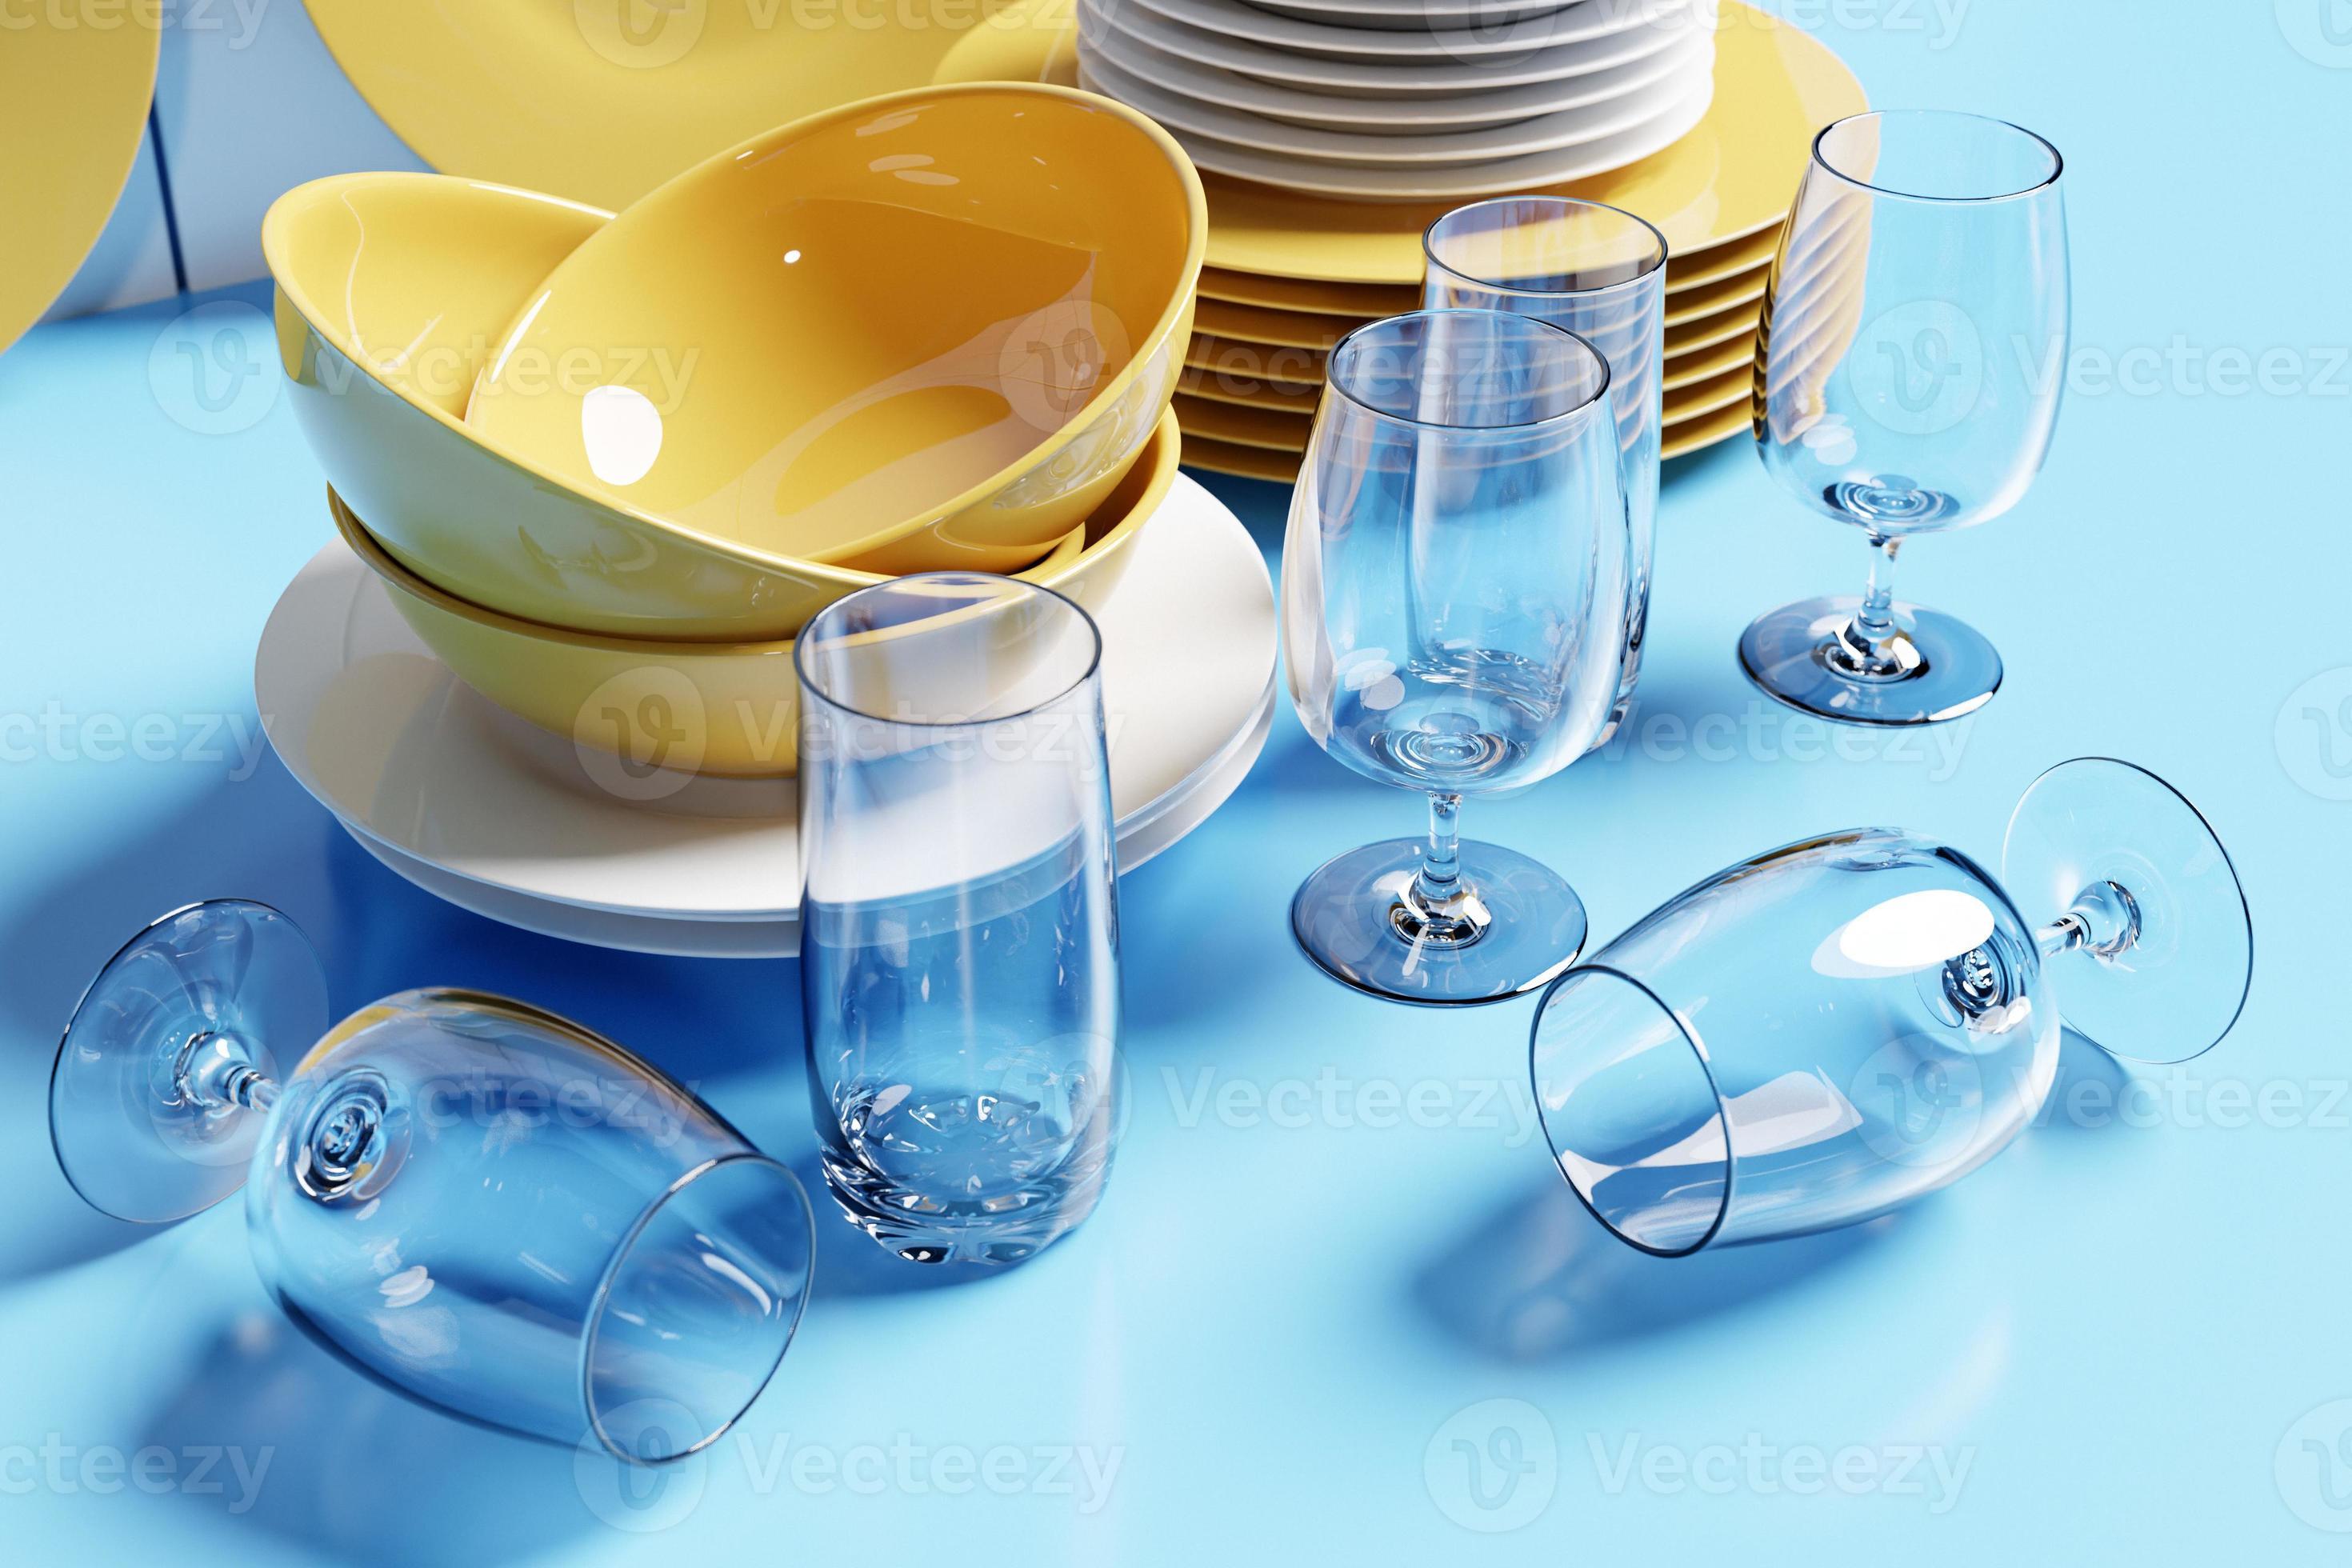 Collection of Retro Kitchenware Stock Image - Image of clean, glas: 37612857